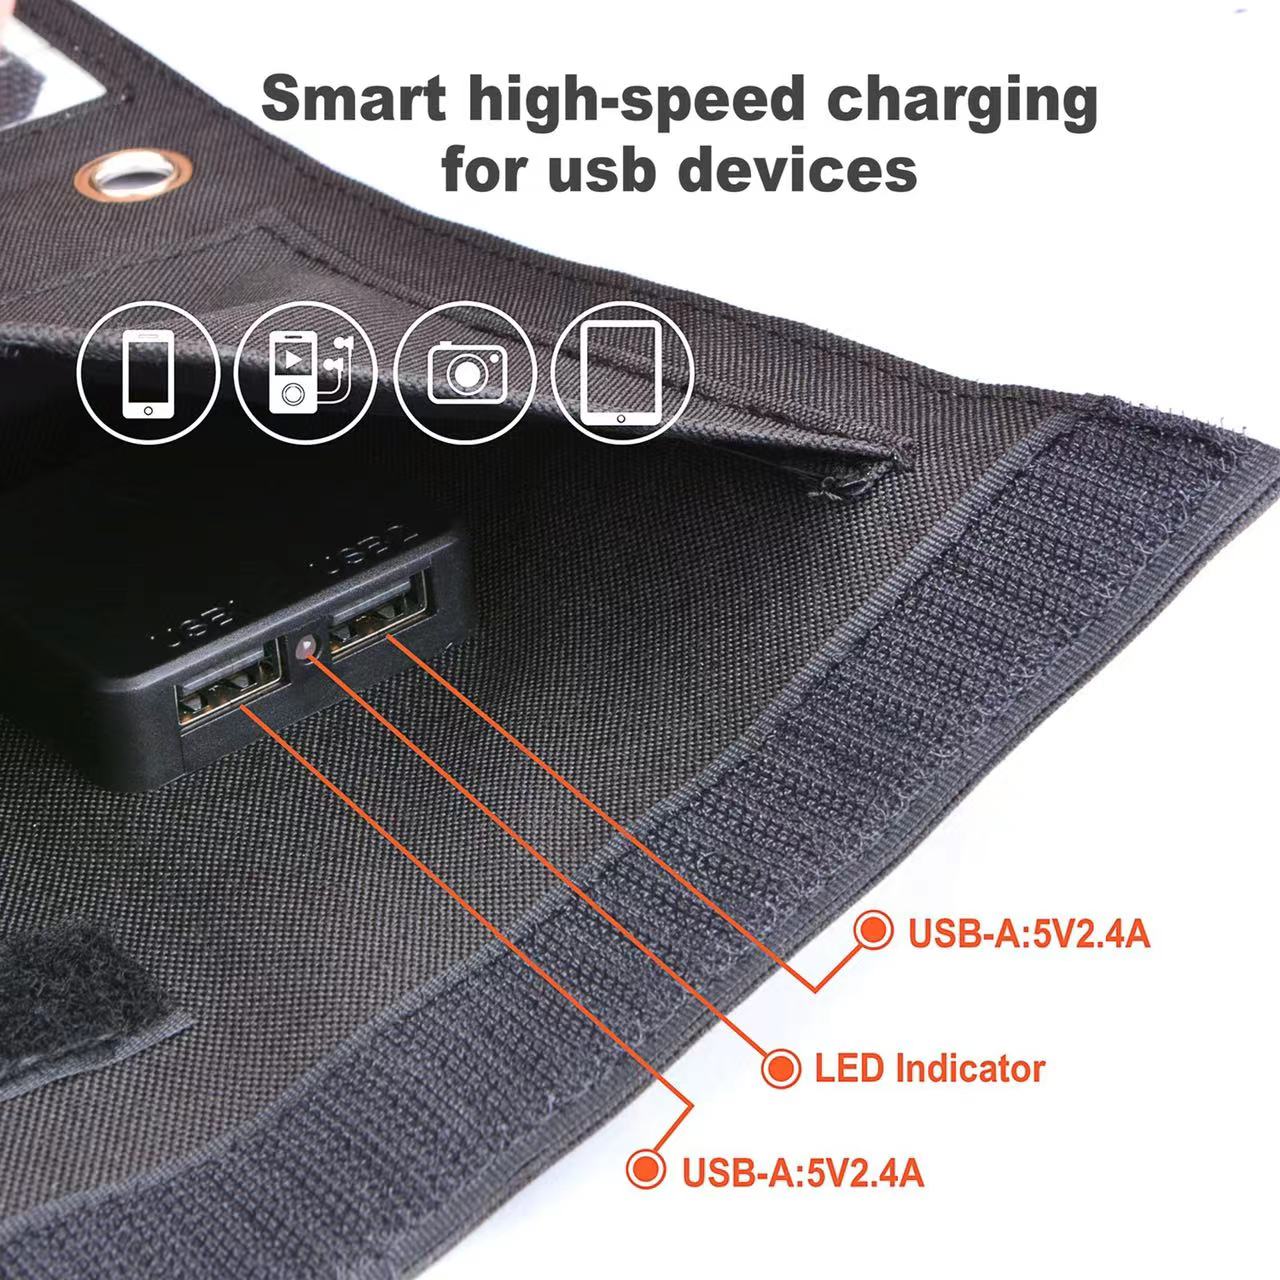 Smart high-speed charging for usb devices USB-A:5